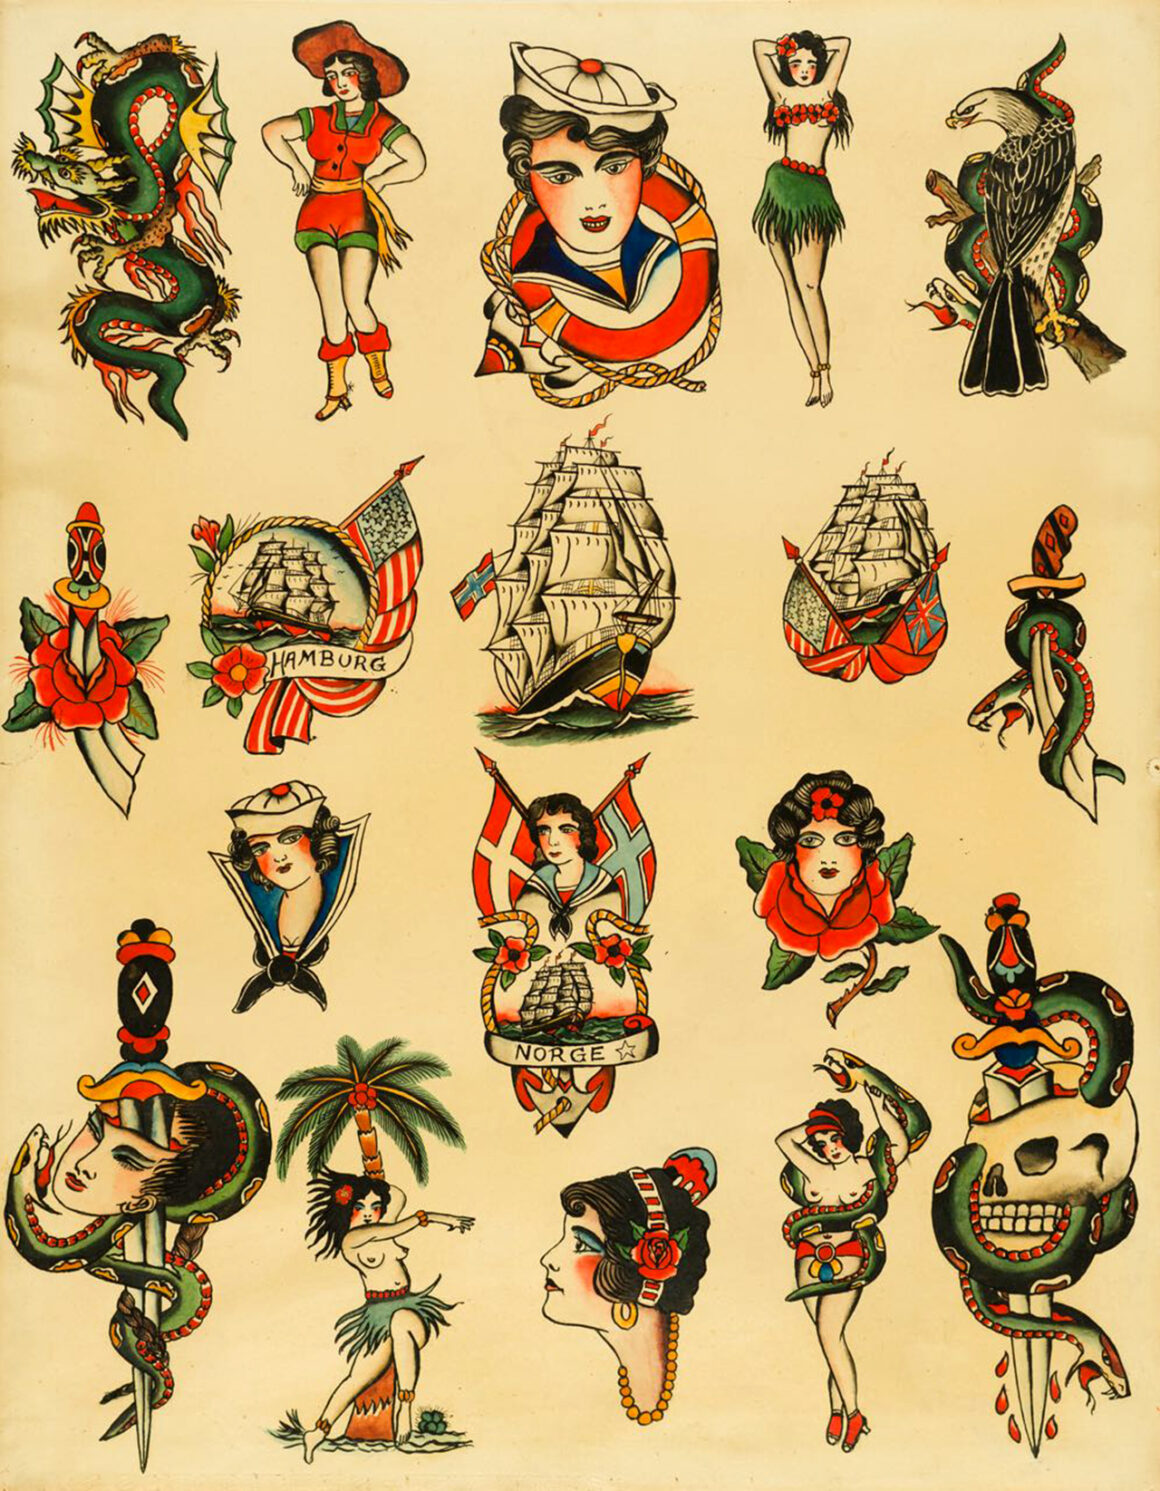 Flash sheet by Christian Warlich, probably 1930/40ies